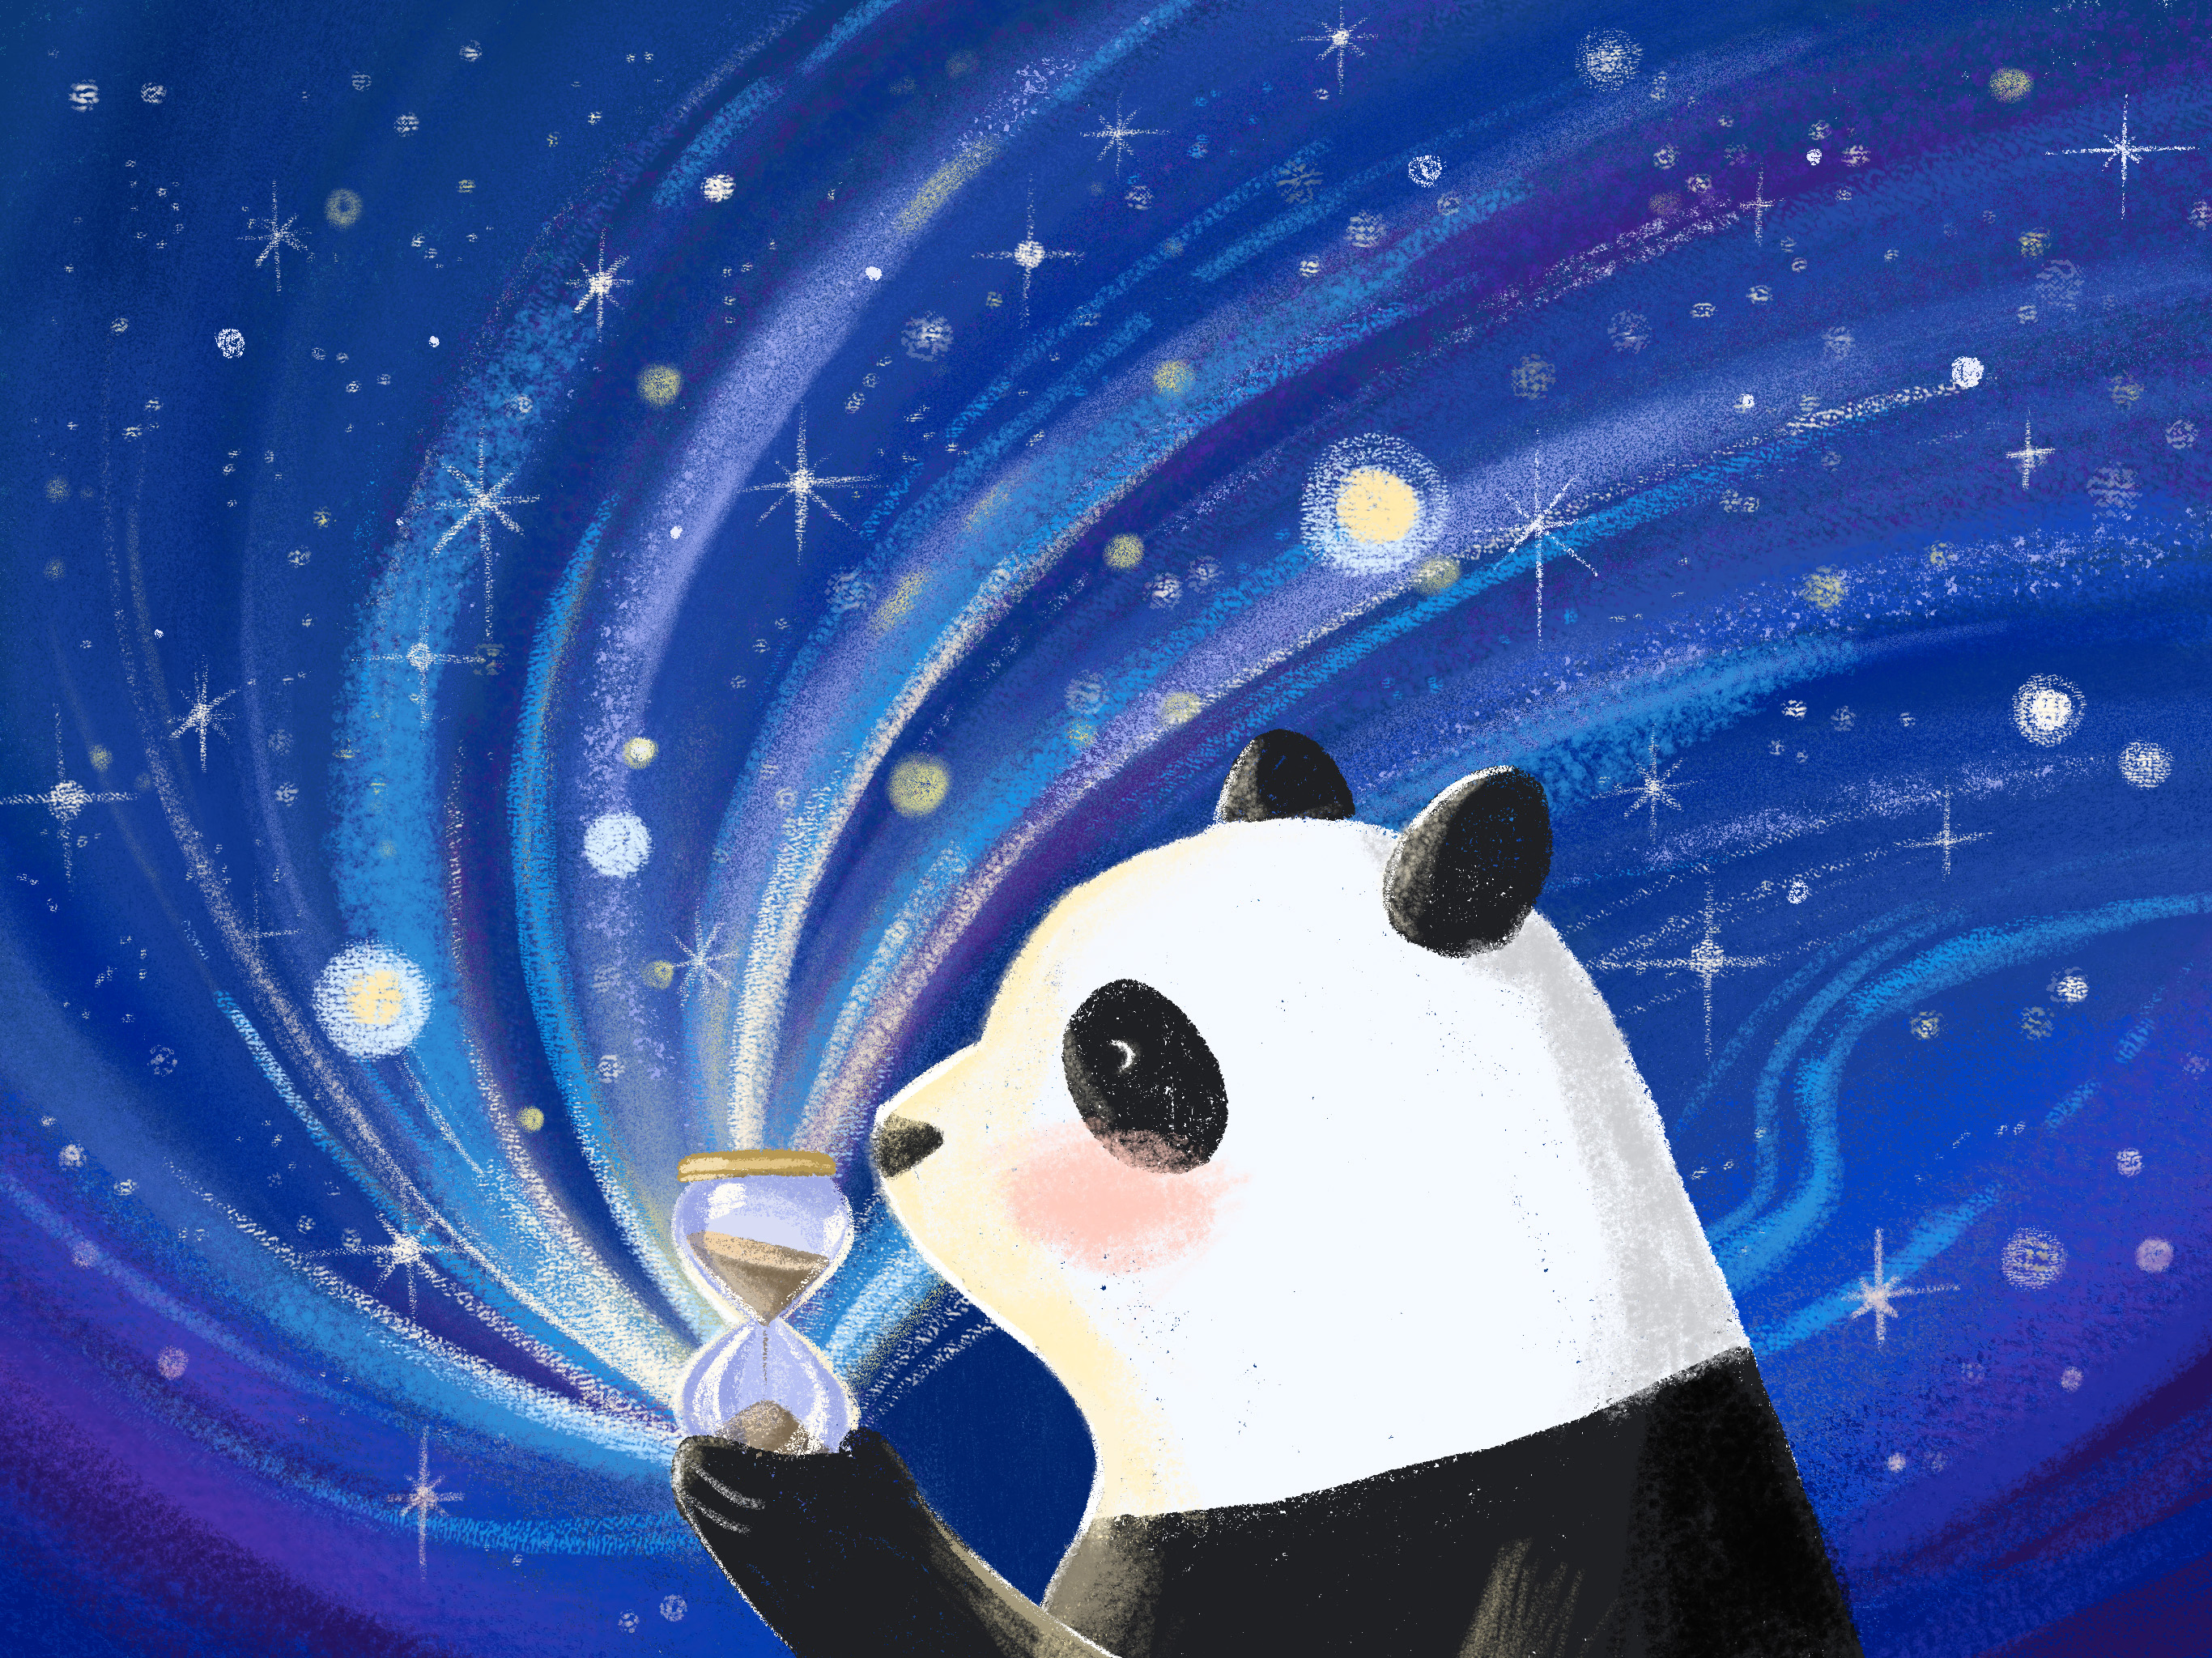 An illustration of a panda holding an hourglass by Chia-Ni Wu.